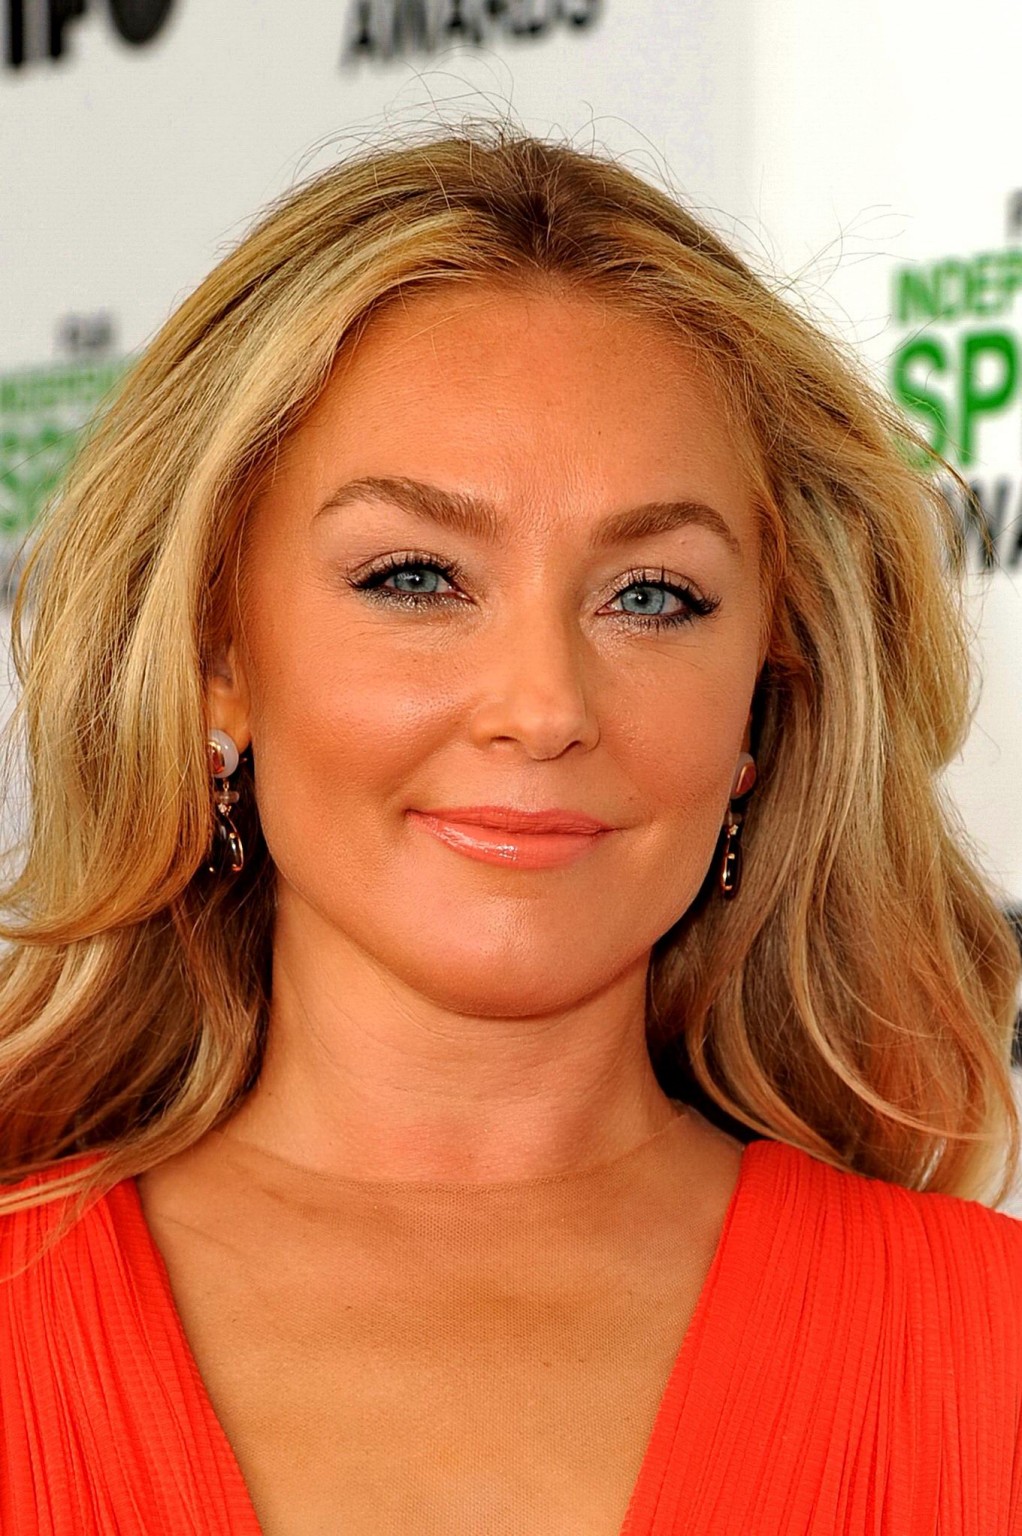 Elisabeth Rohm braless showing side boob and cleavage at the 2014 Film Independe #75203046